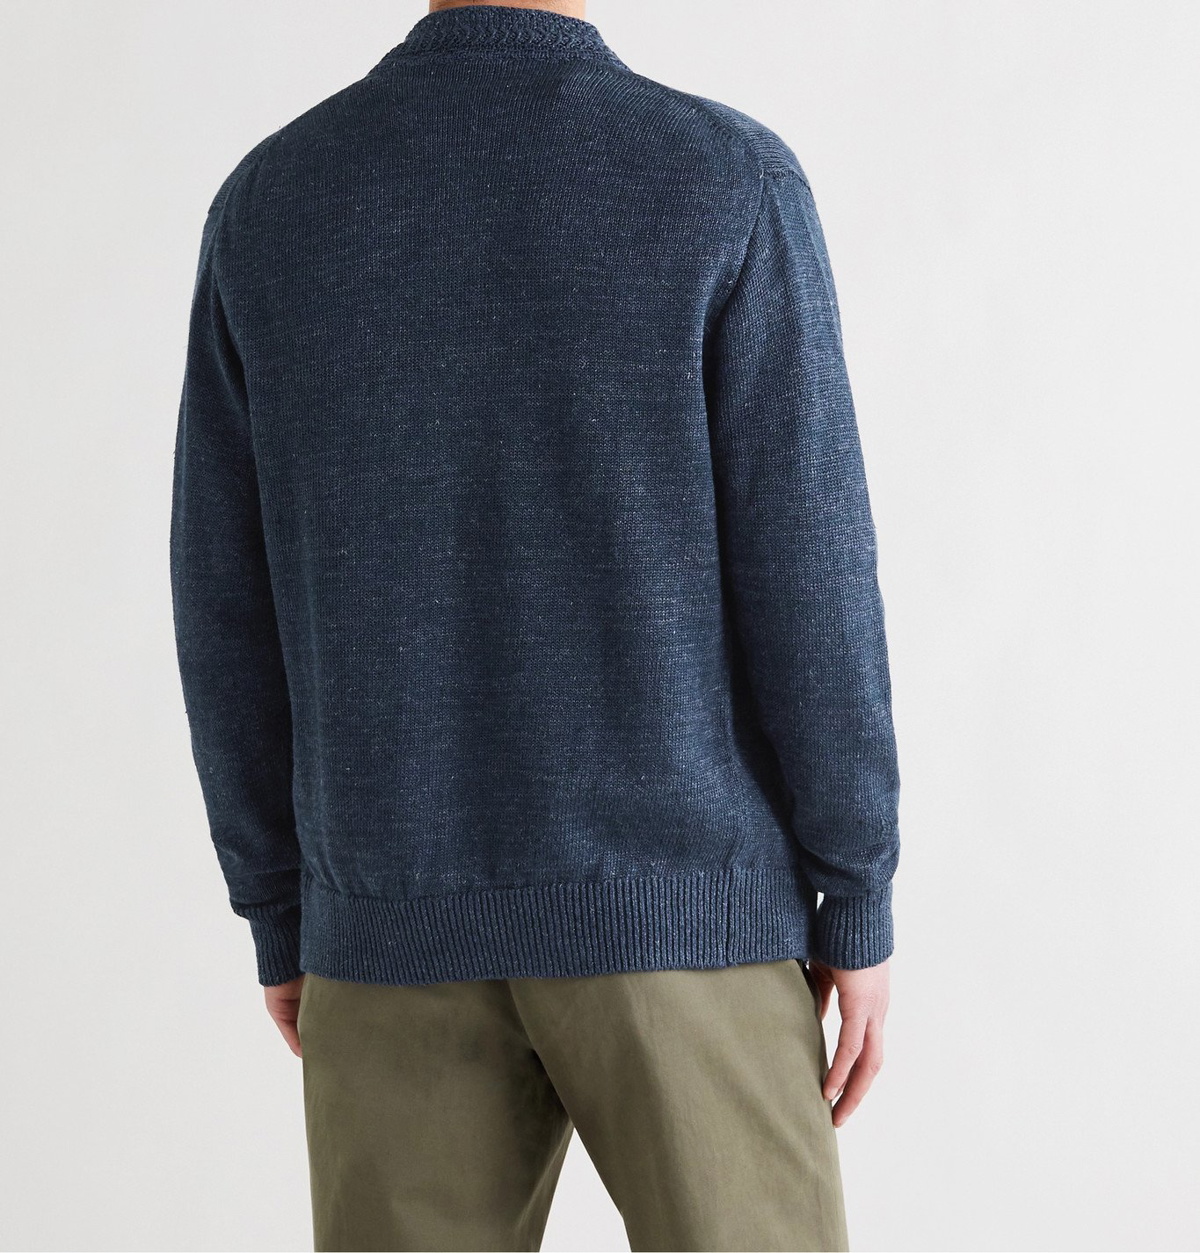 Inis Meáin - Washed-Linen Zip-Up Cardigan - Blue Inis Meáin